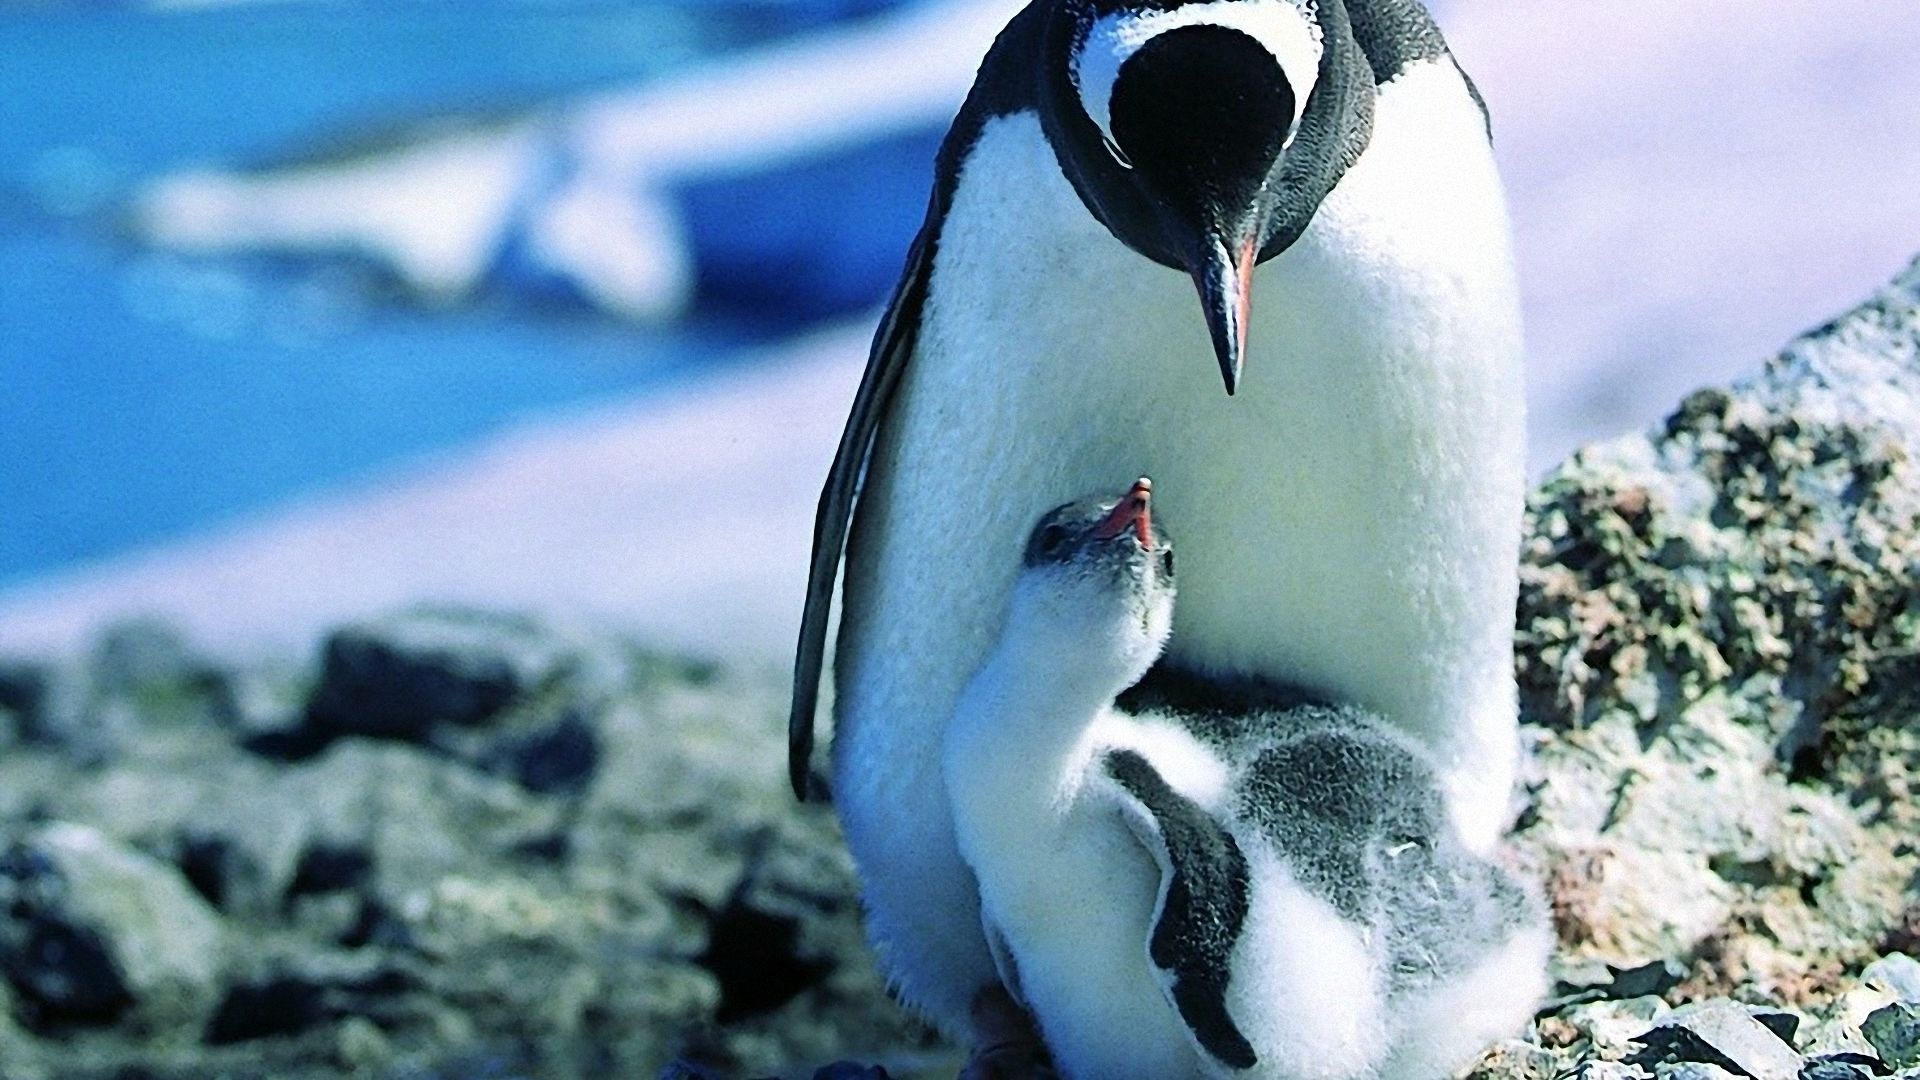 Penguin, Numerous wallpapers, Stunning collection, Visual extravaganza, 1920x1080 Full HD Desktop